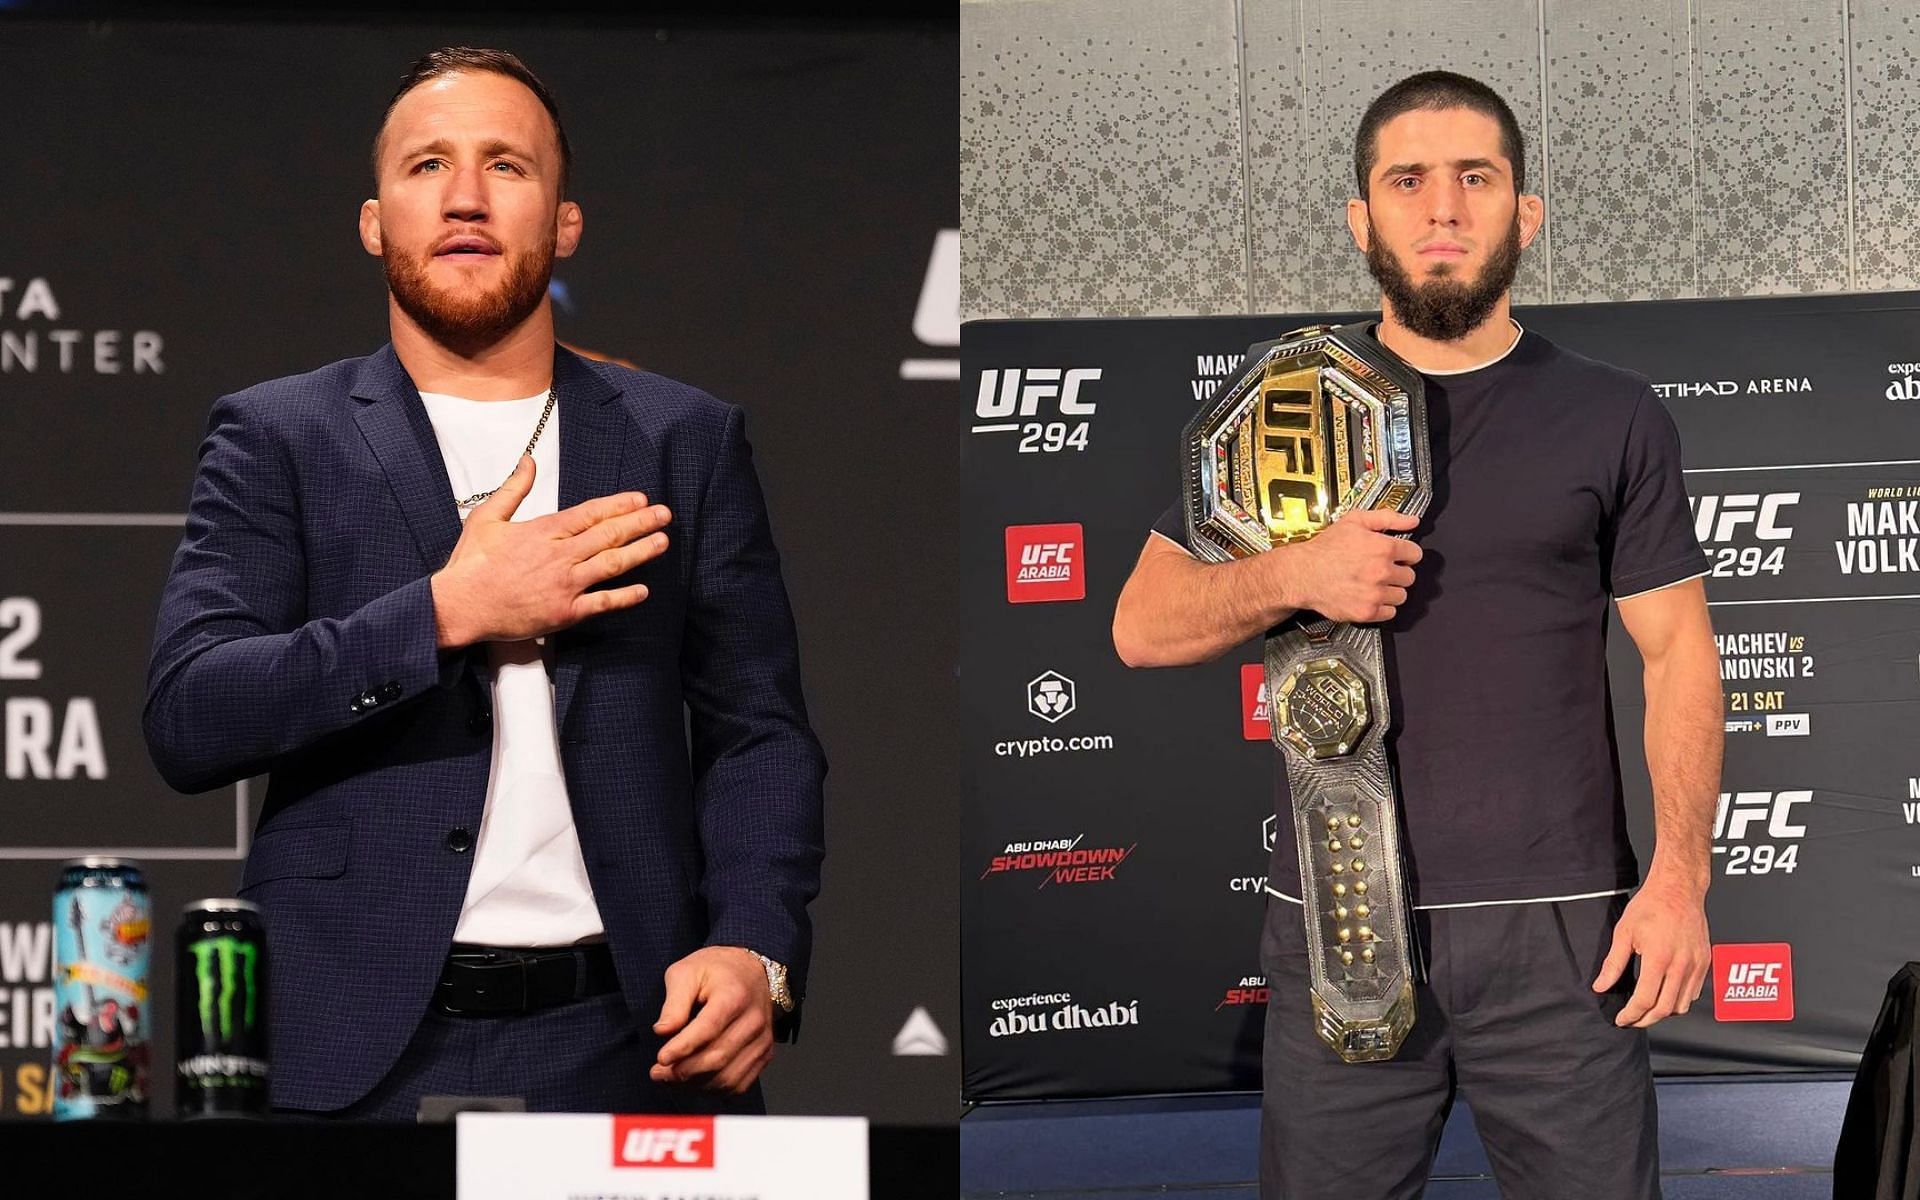 Justin Gaethje (left) on potential fight against Islam Makhachev (right) [Images courtesy: @justin_gaethje and @islam_makhachev on Instagram]